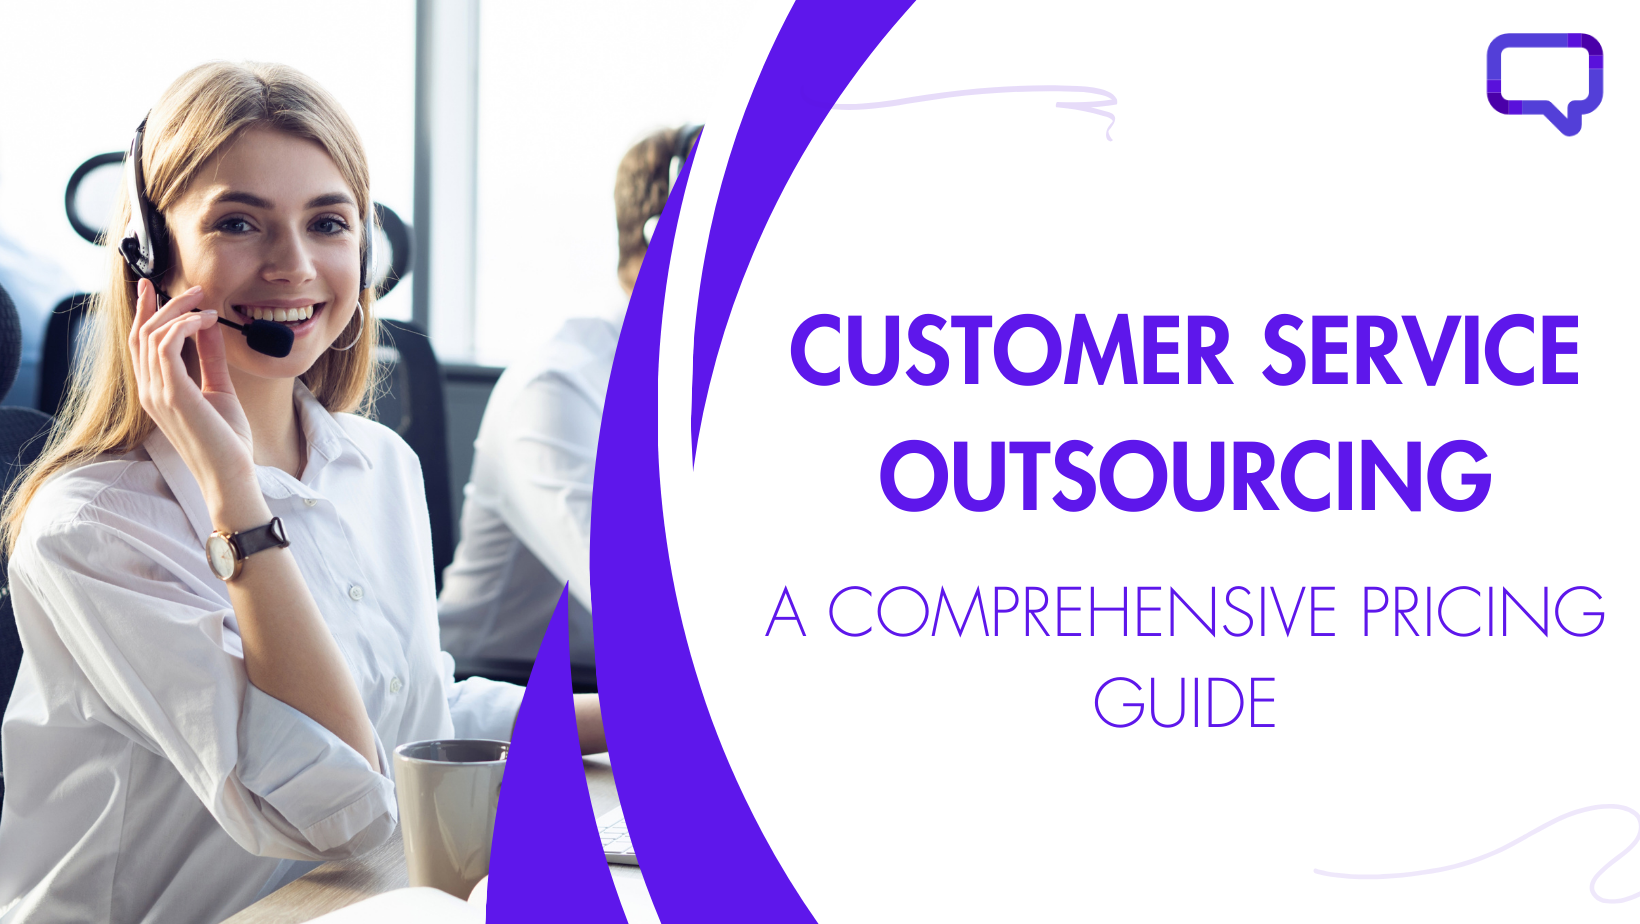 Customer Service Outsourcing- A Comprehensive Pricing Guide